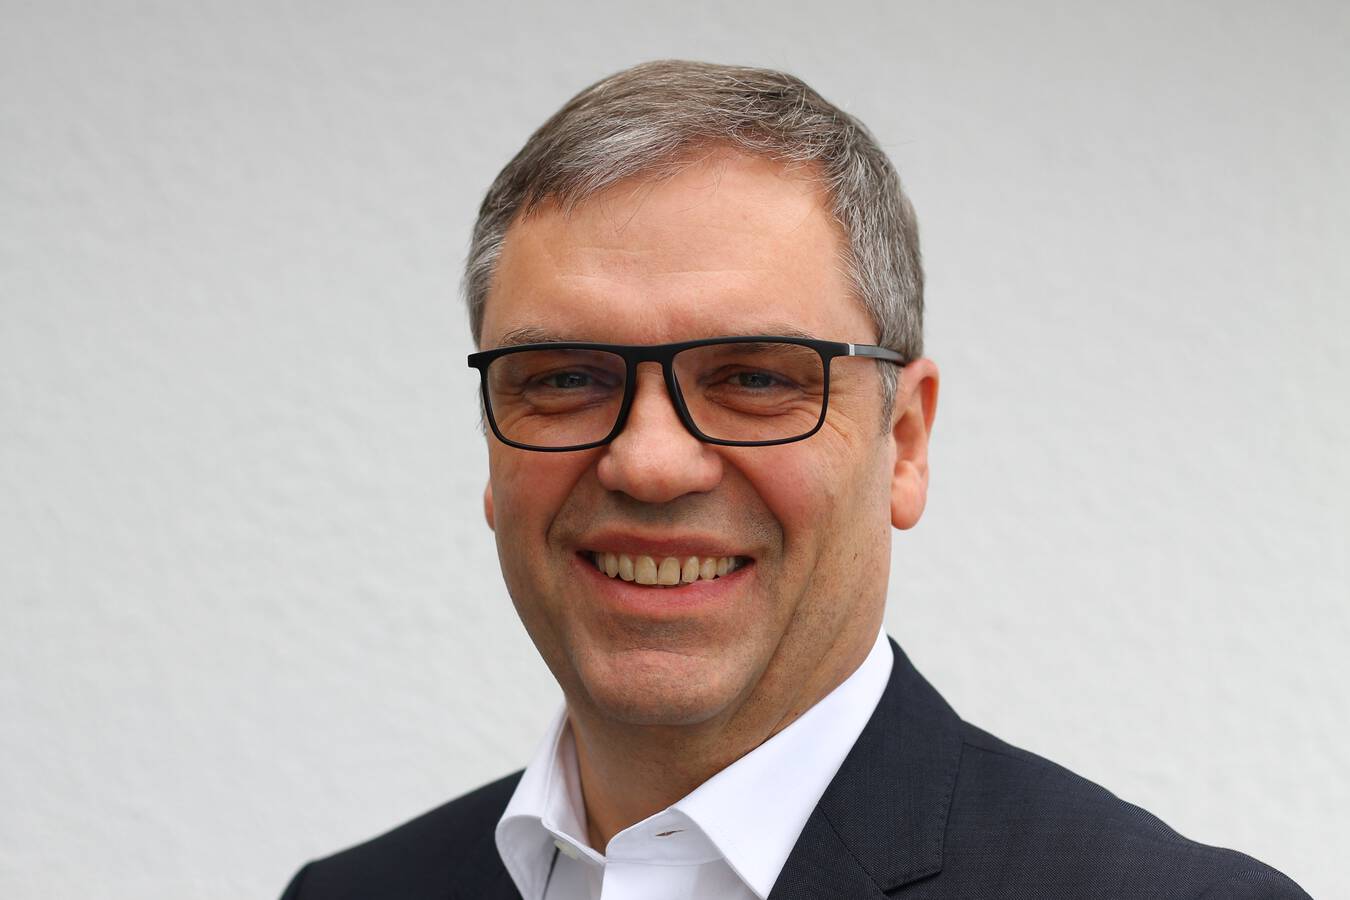 Ulrich Stolz is Head of Technical Engineering at Keller Lufttechnik in Kirchheim unter Teck. Keller Lufttechnik specializes in clean air for all industries. The family run company, now in its fourth generation, commands a global presence. Ulrich Stolz is 